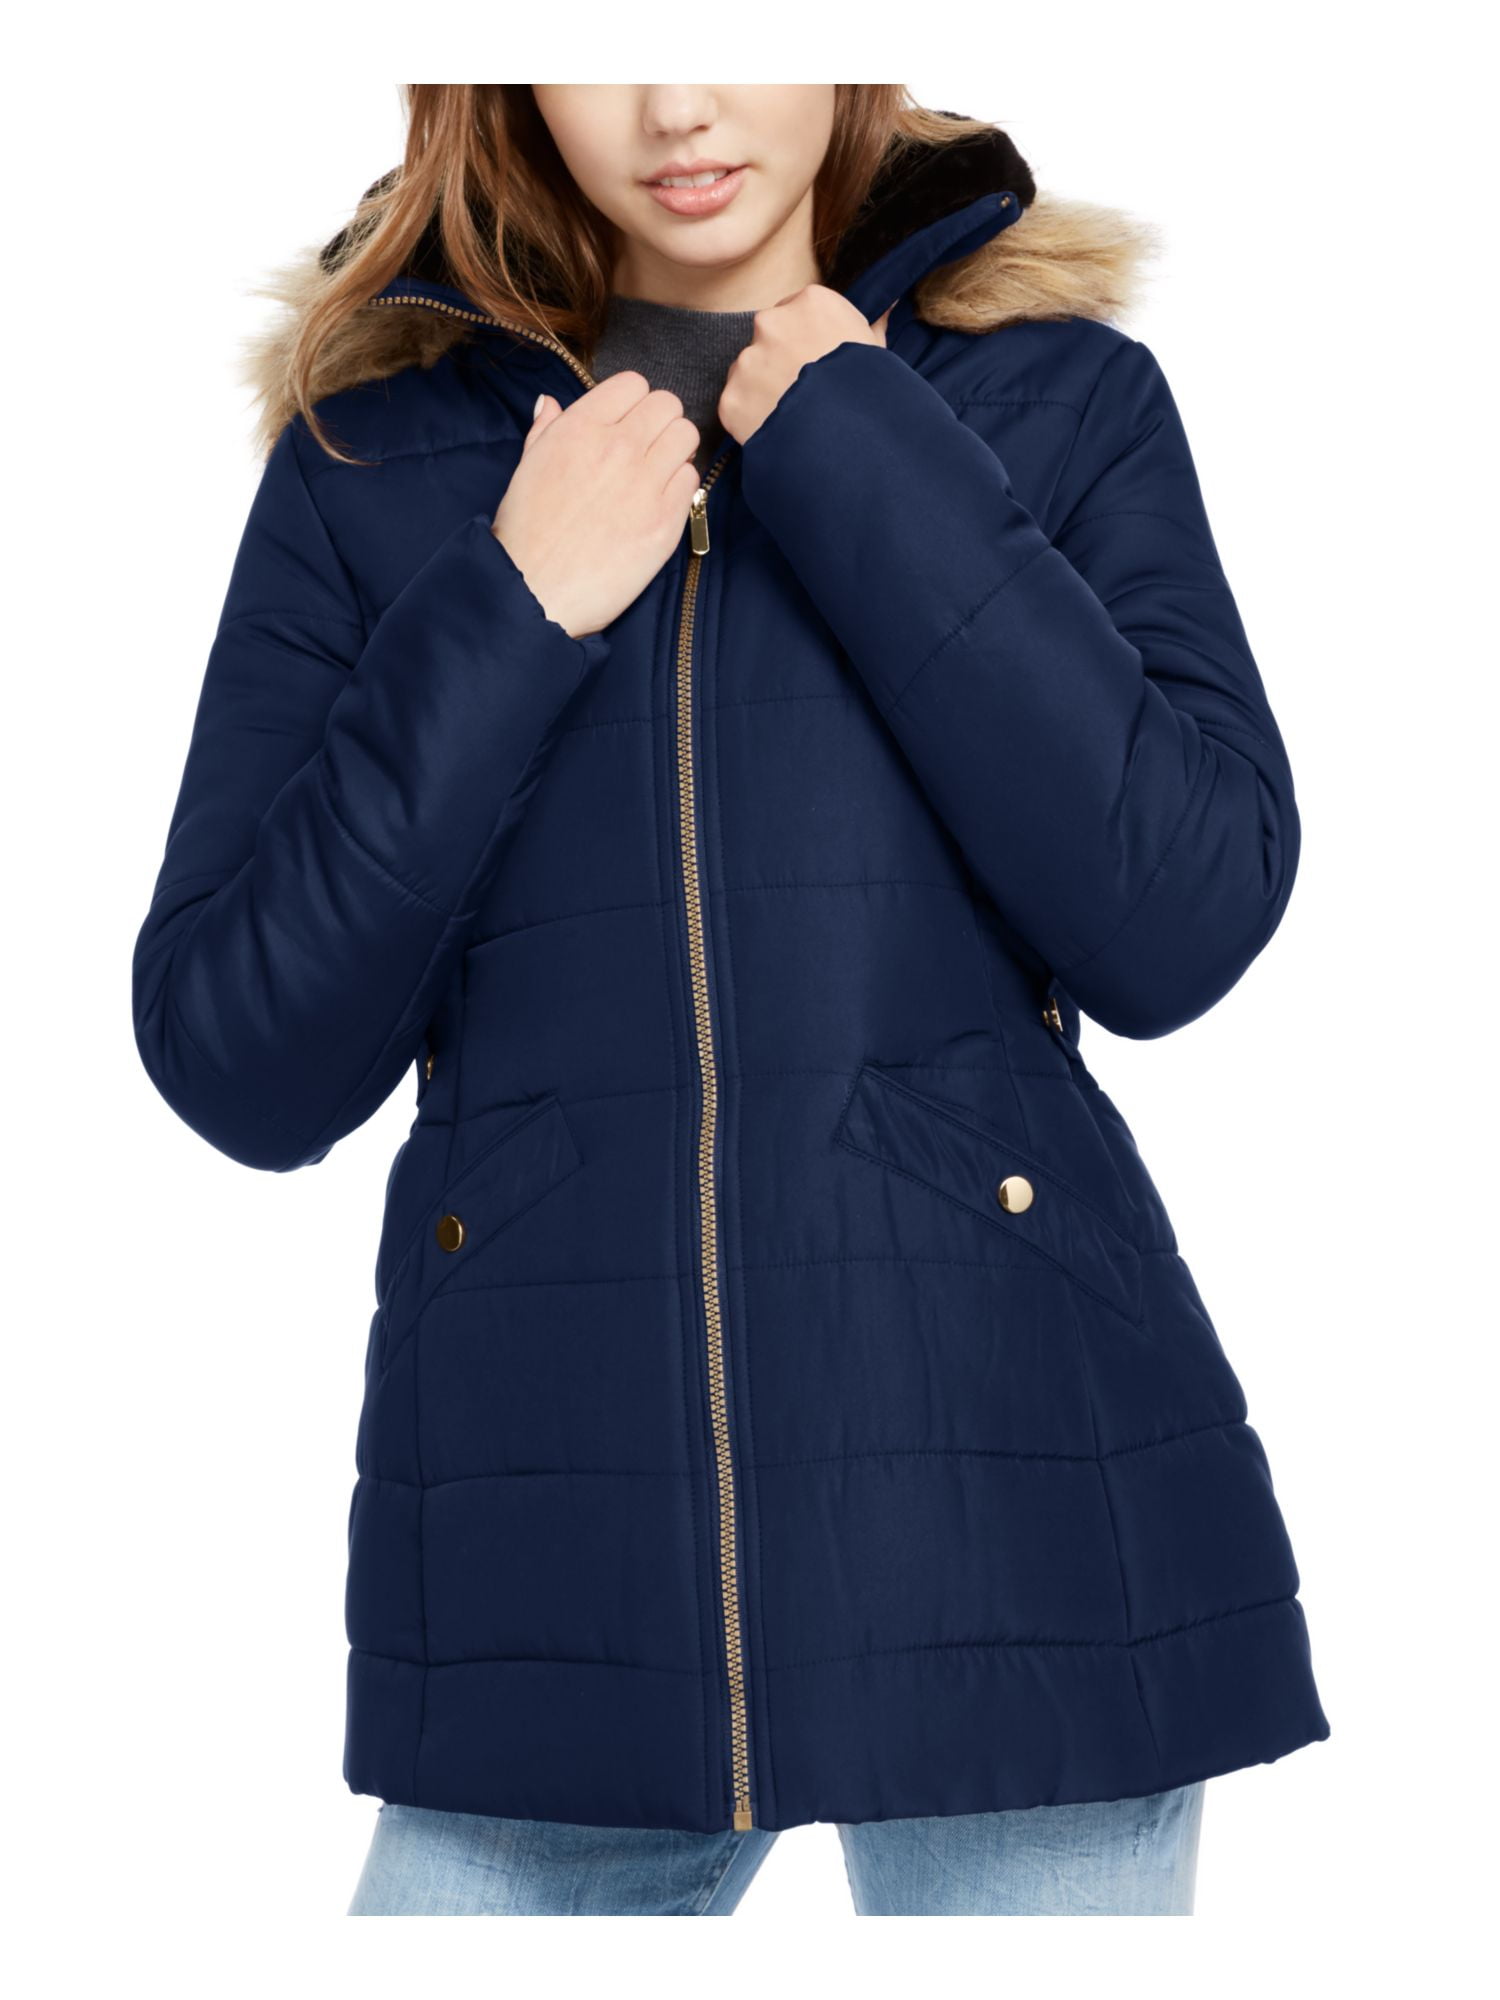 Celebrity Pink Womens Warm Winter Jacket with Faux Trimmed Hood